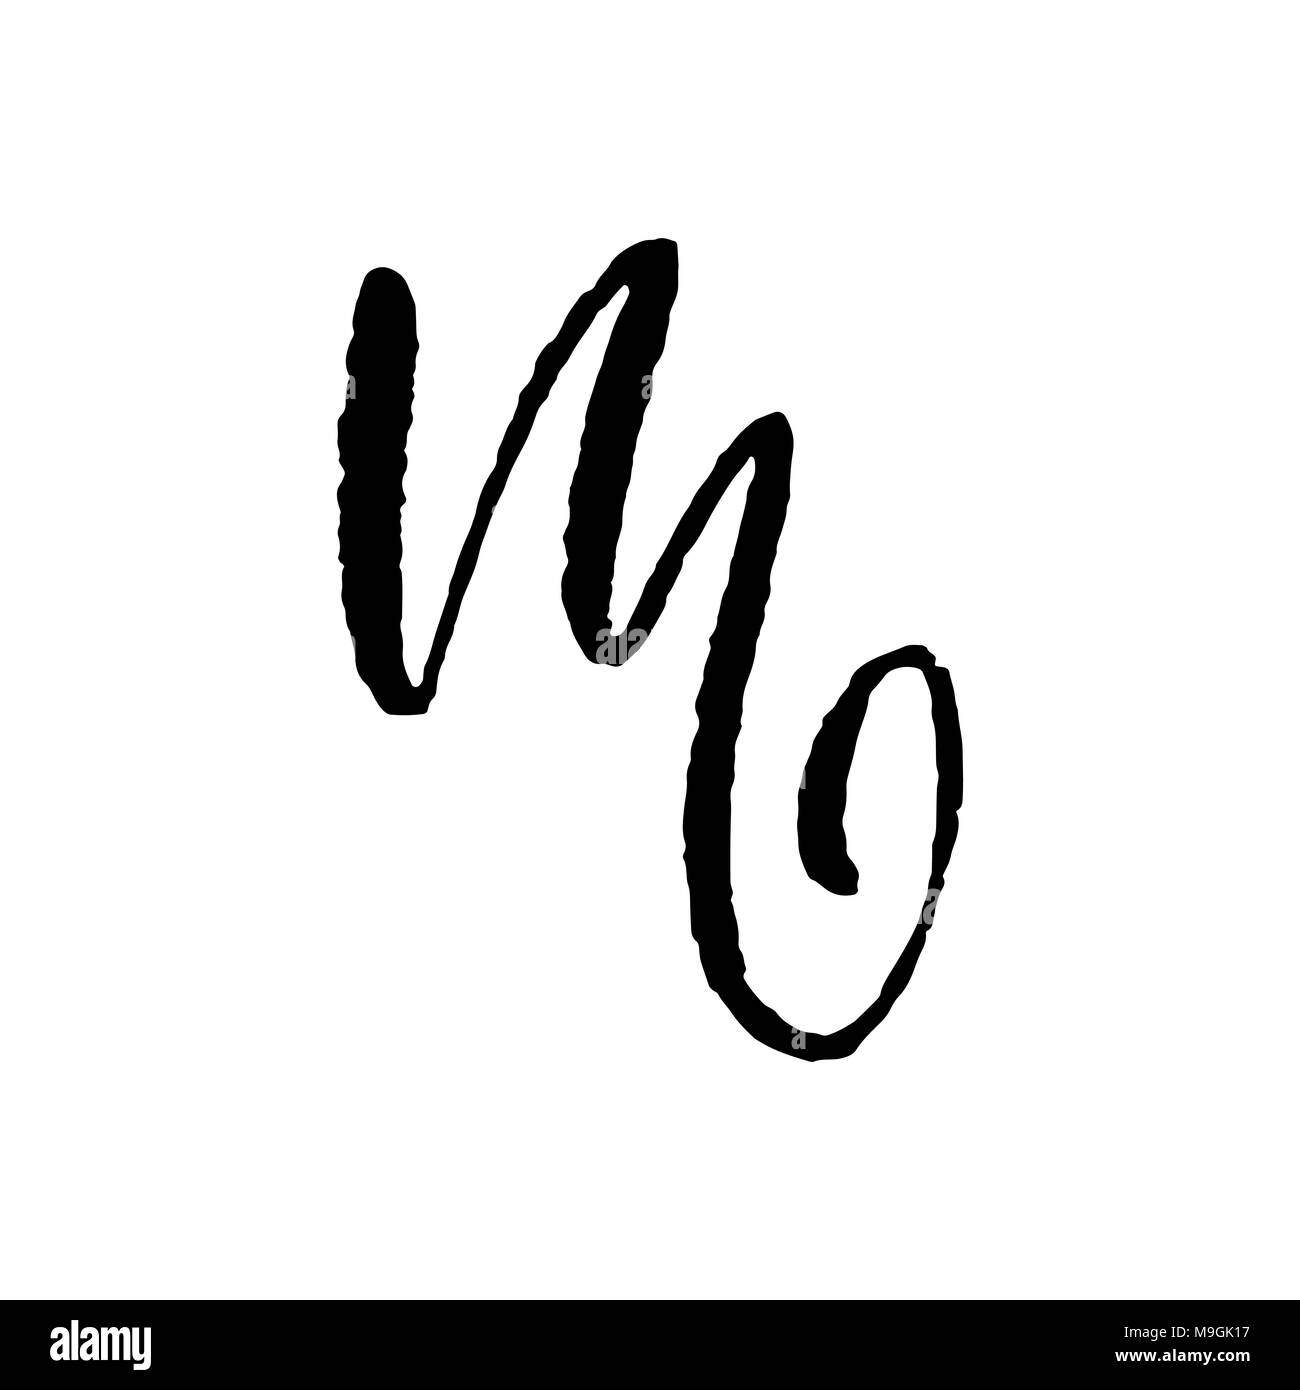 Letter M Handwritten By Dry Brush Rough Strokes Textured Font